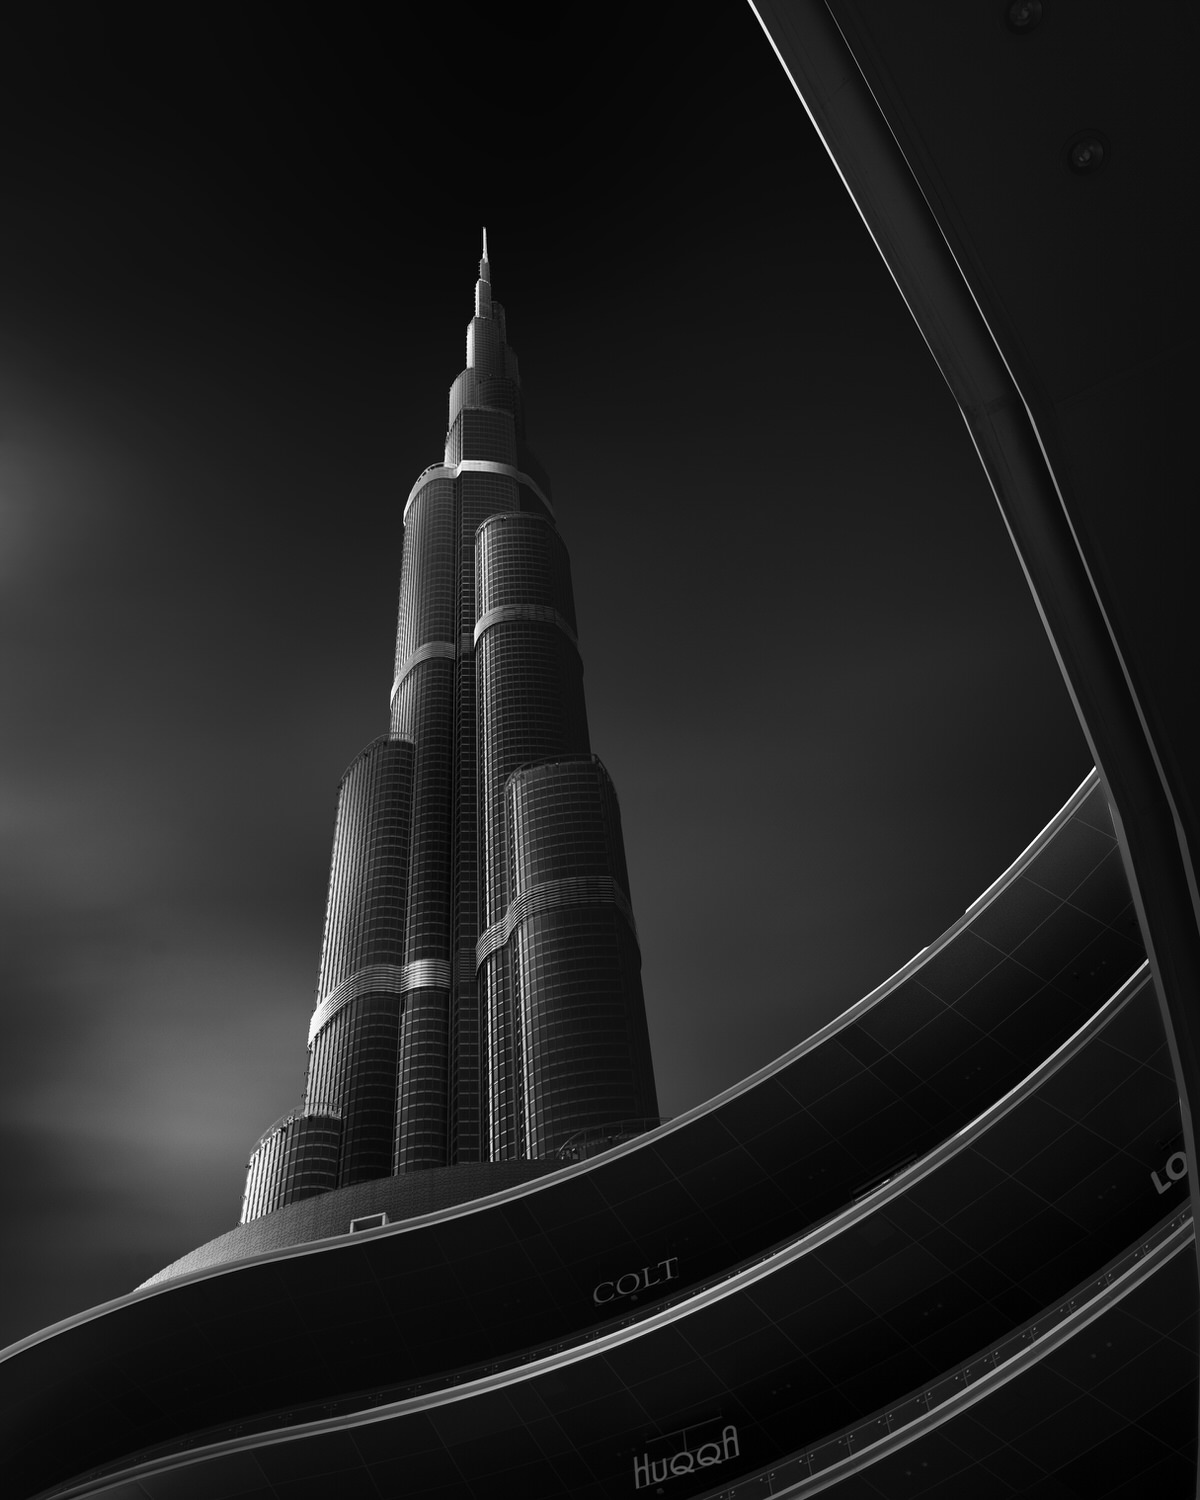 black and white photo of the worlds tallest building in dubai